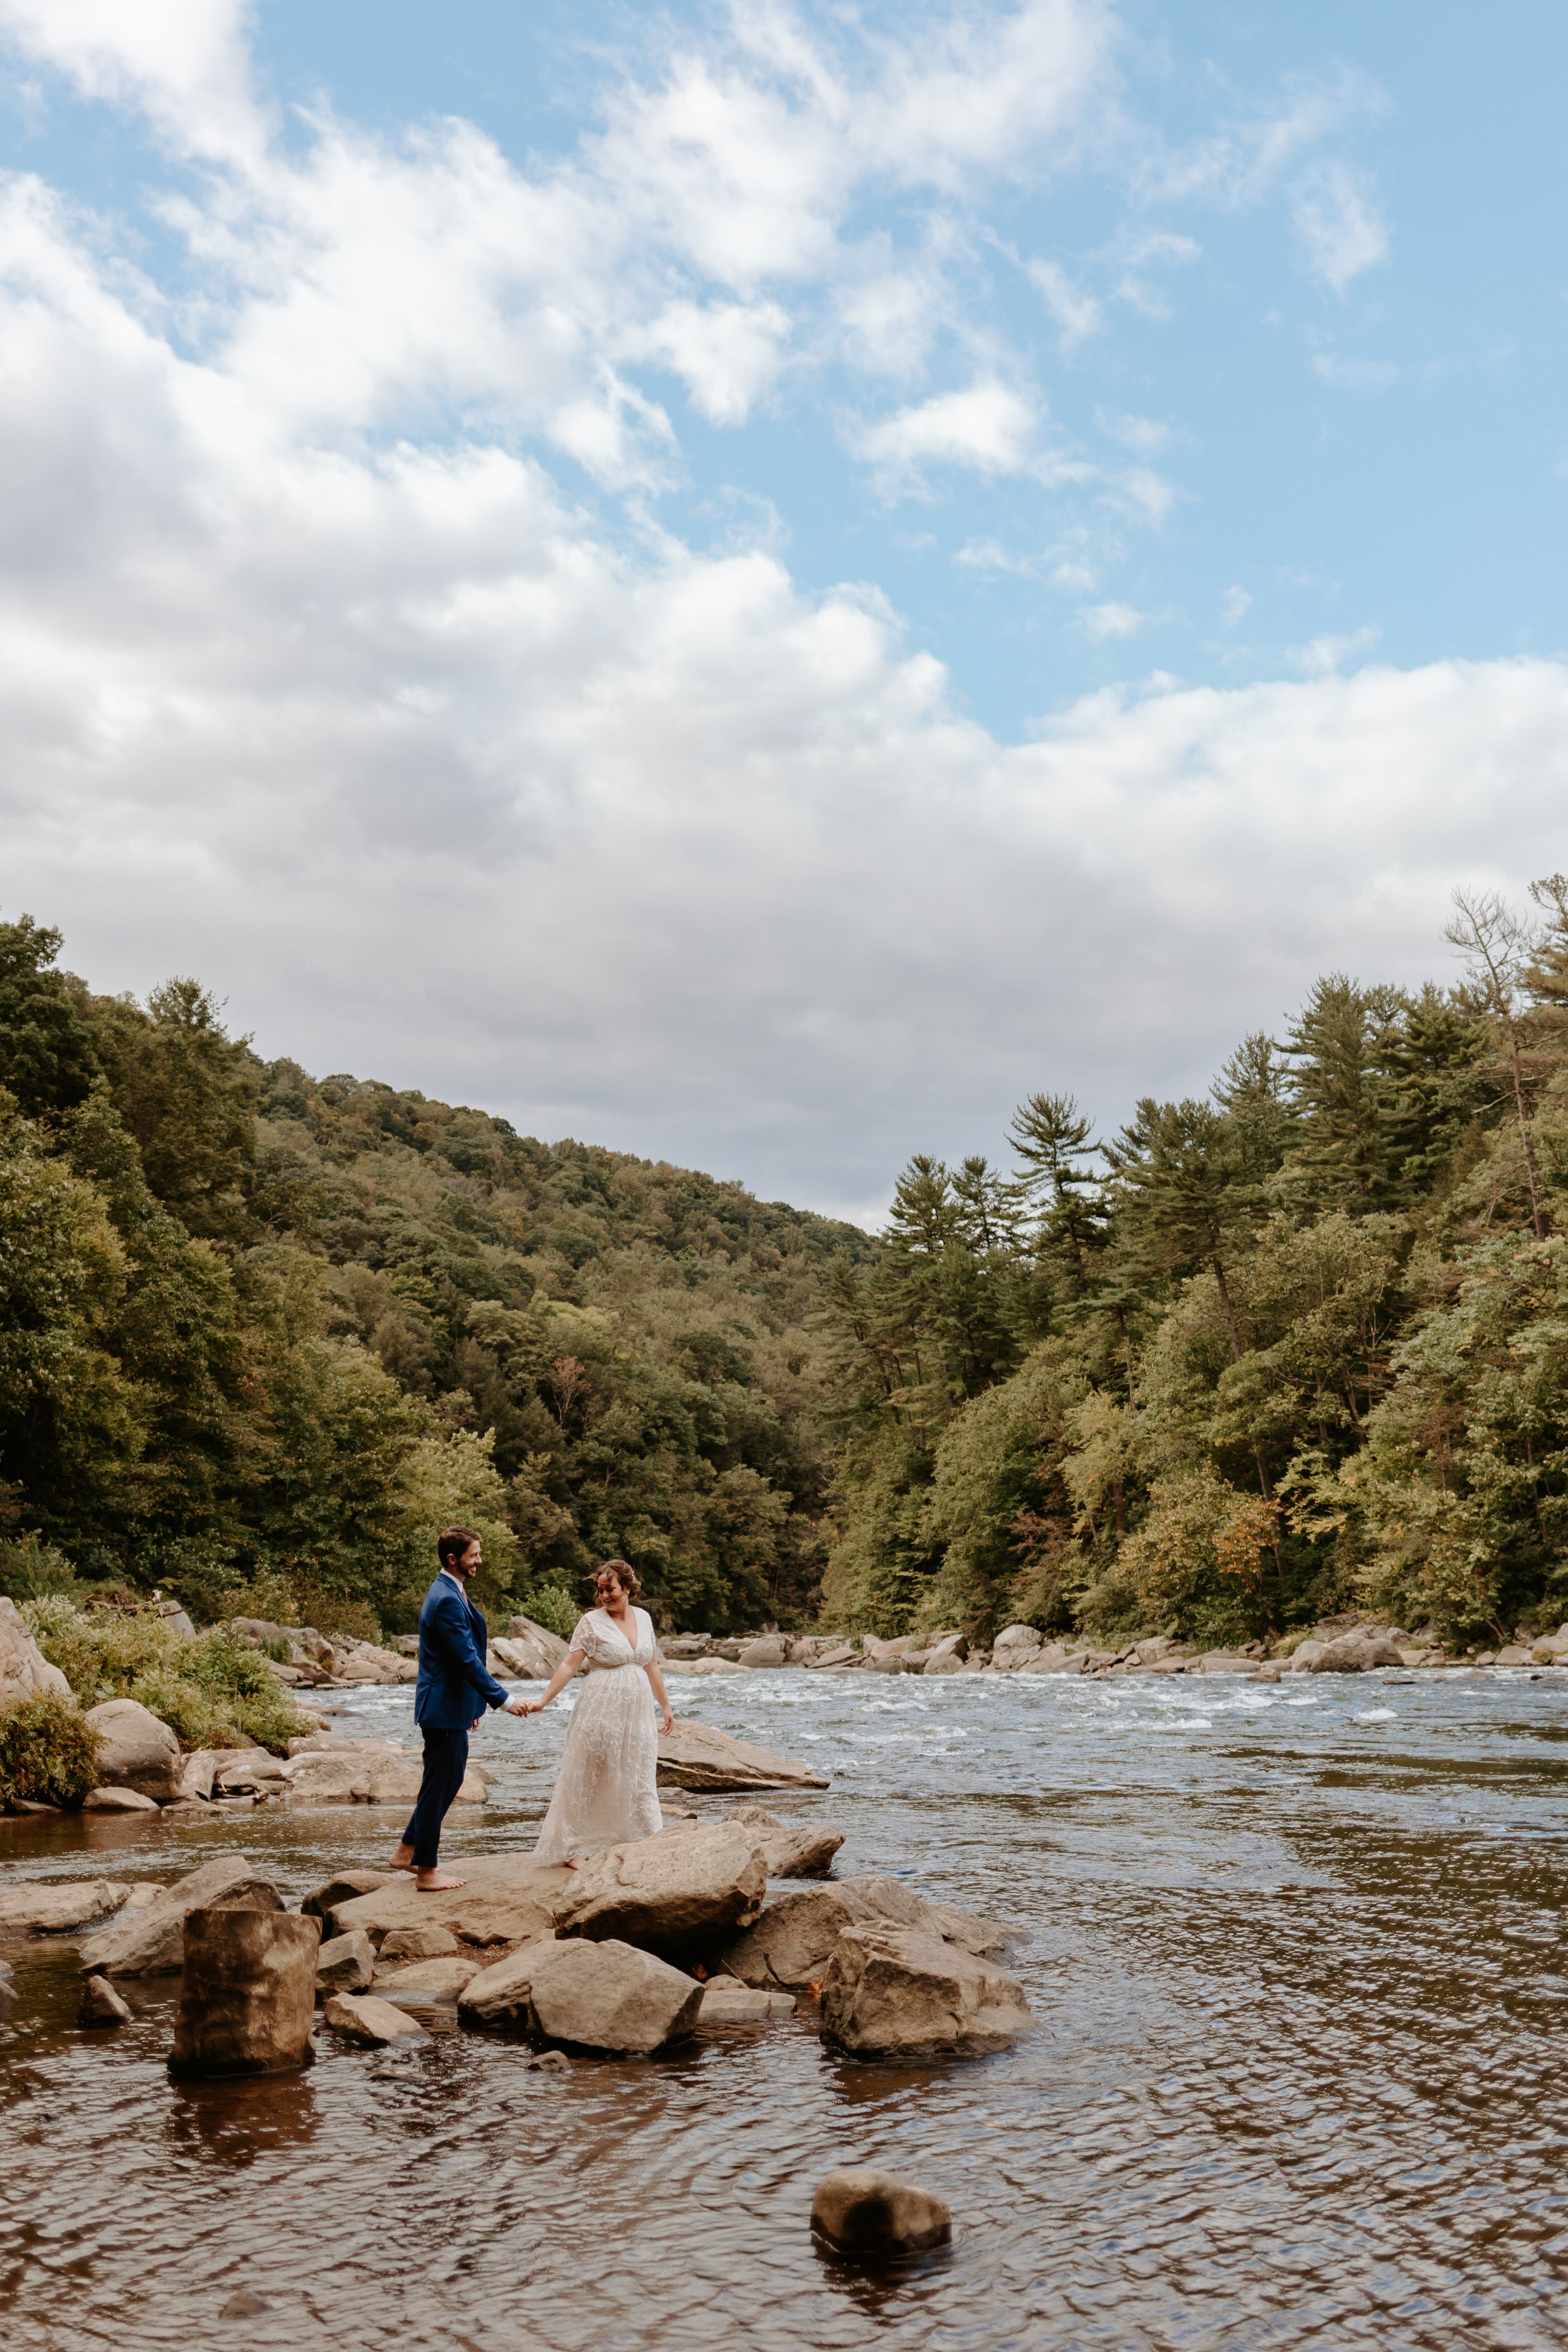 A bride and groom standing on rocks in a river.